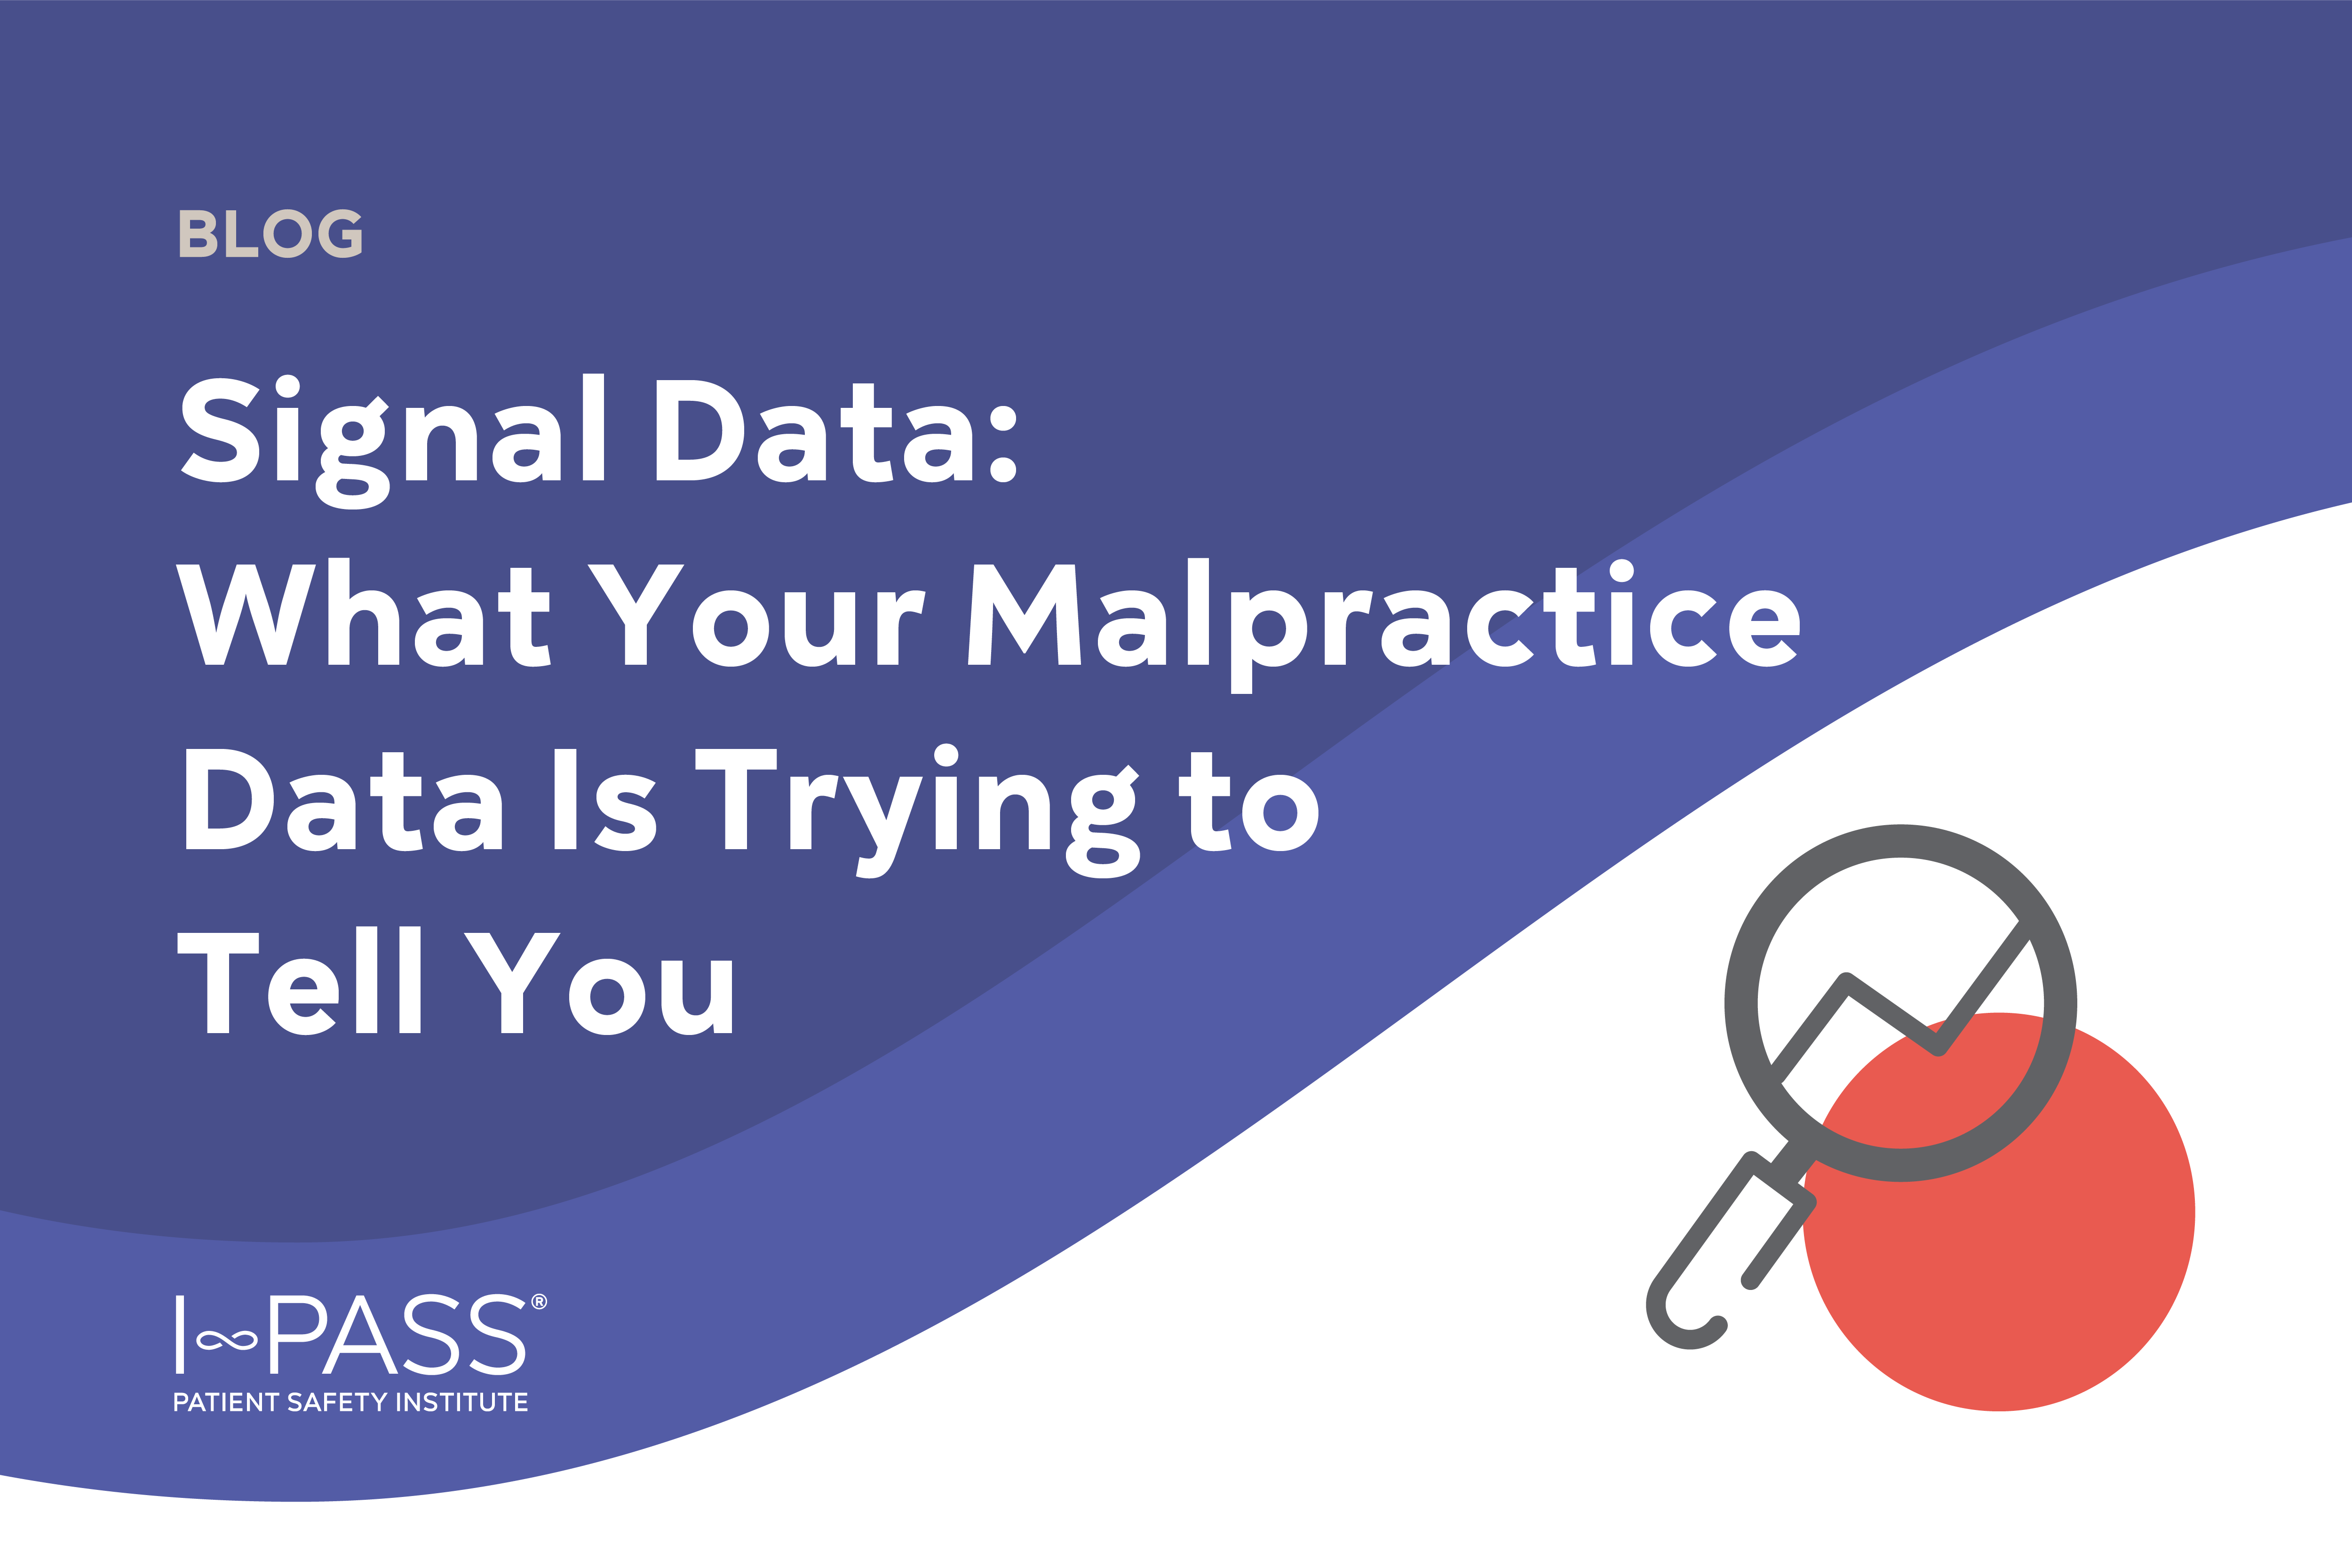 Signal Data: What Your Malpractice Data Is Trying to Tell You